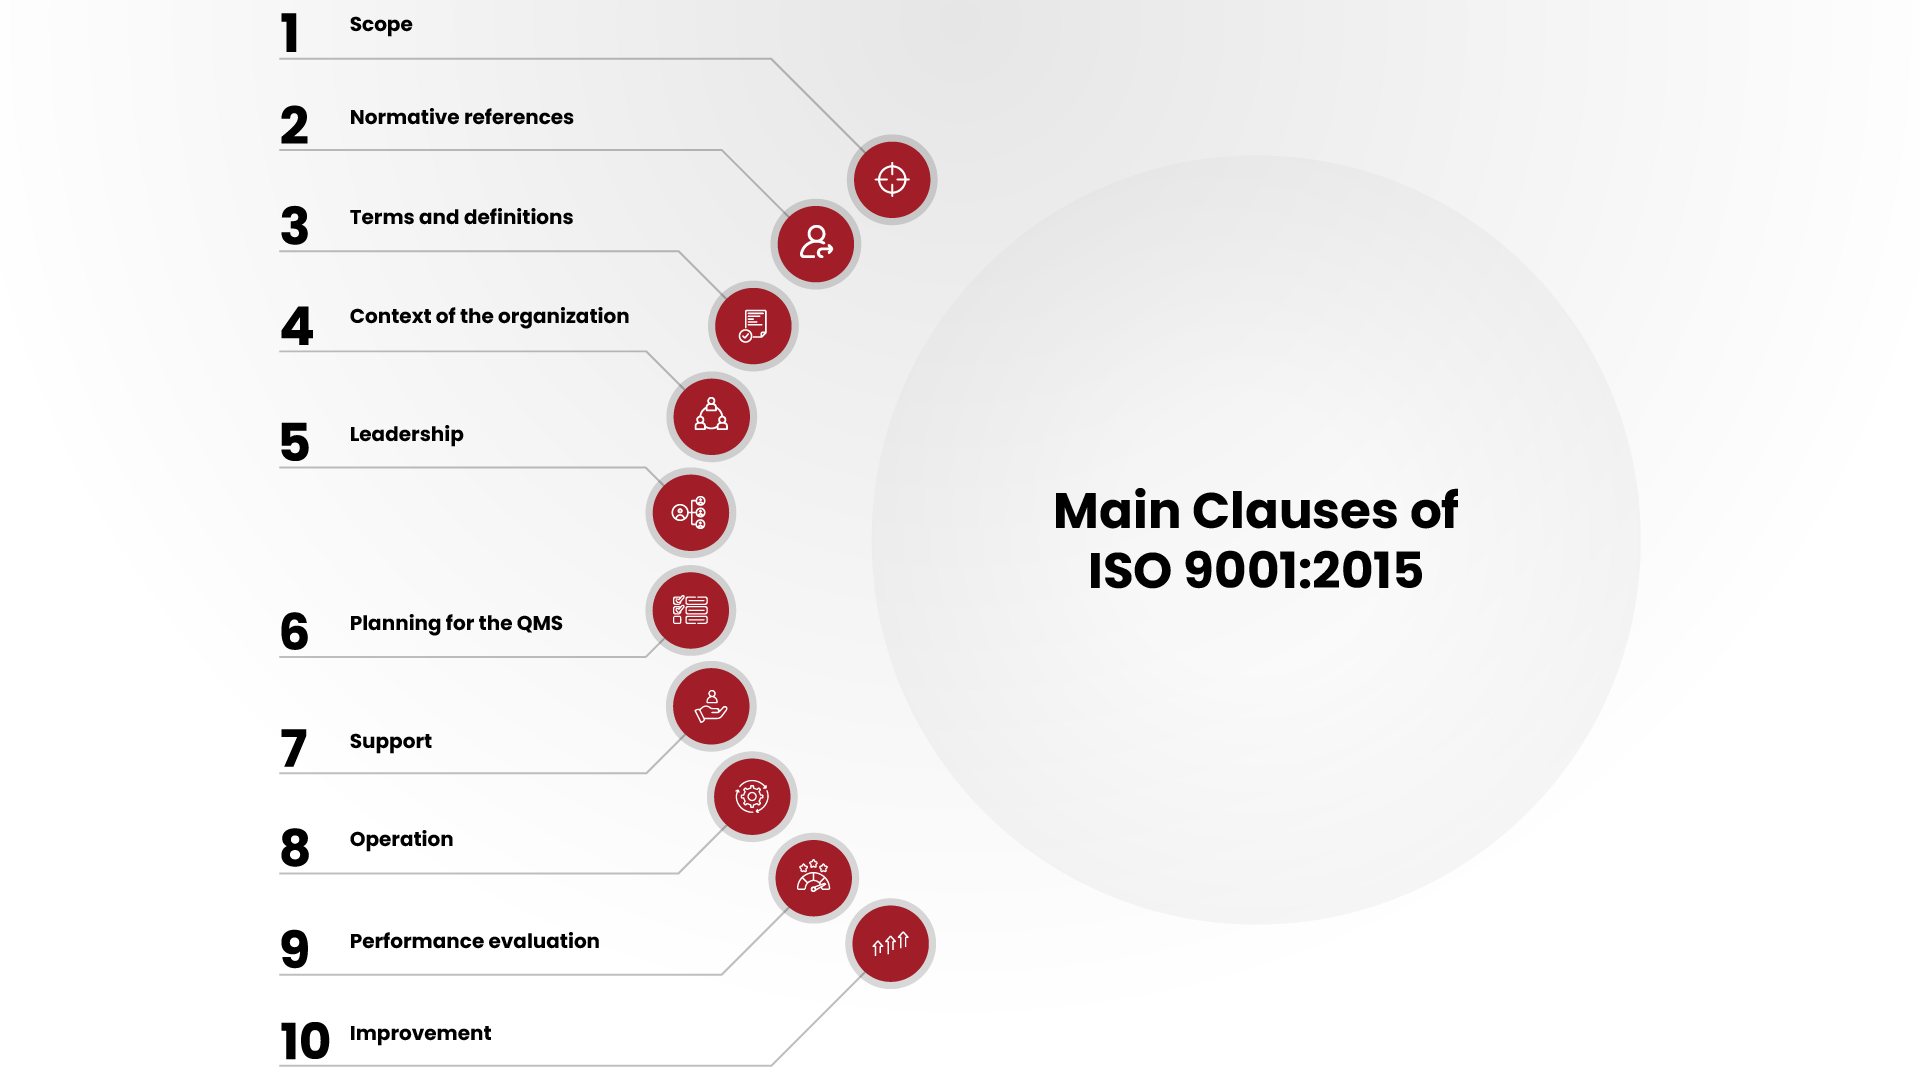 main clauses of ISO 9001